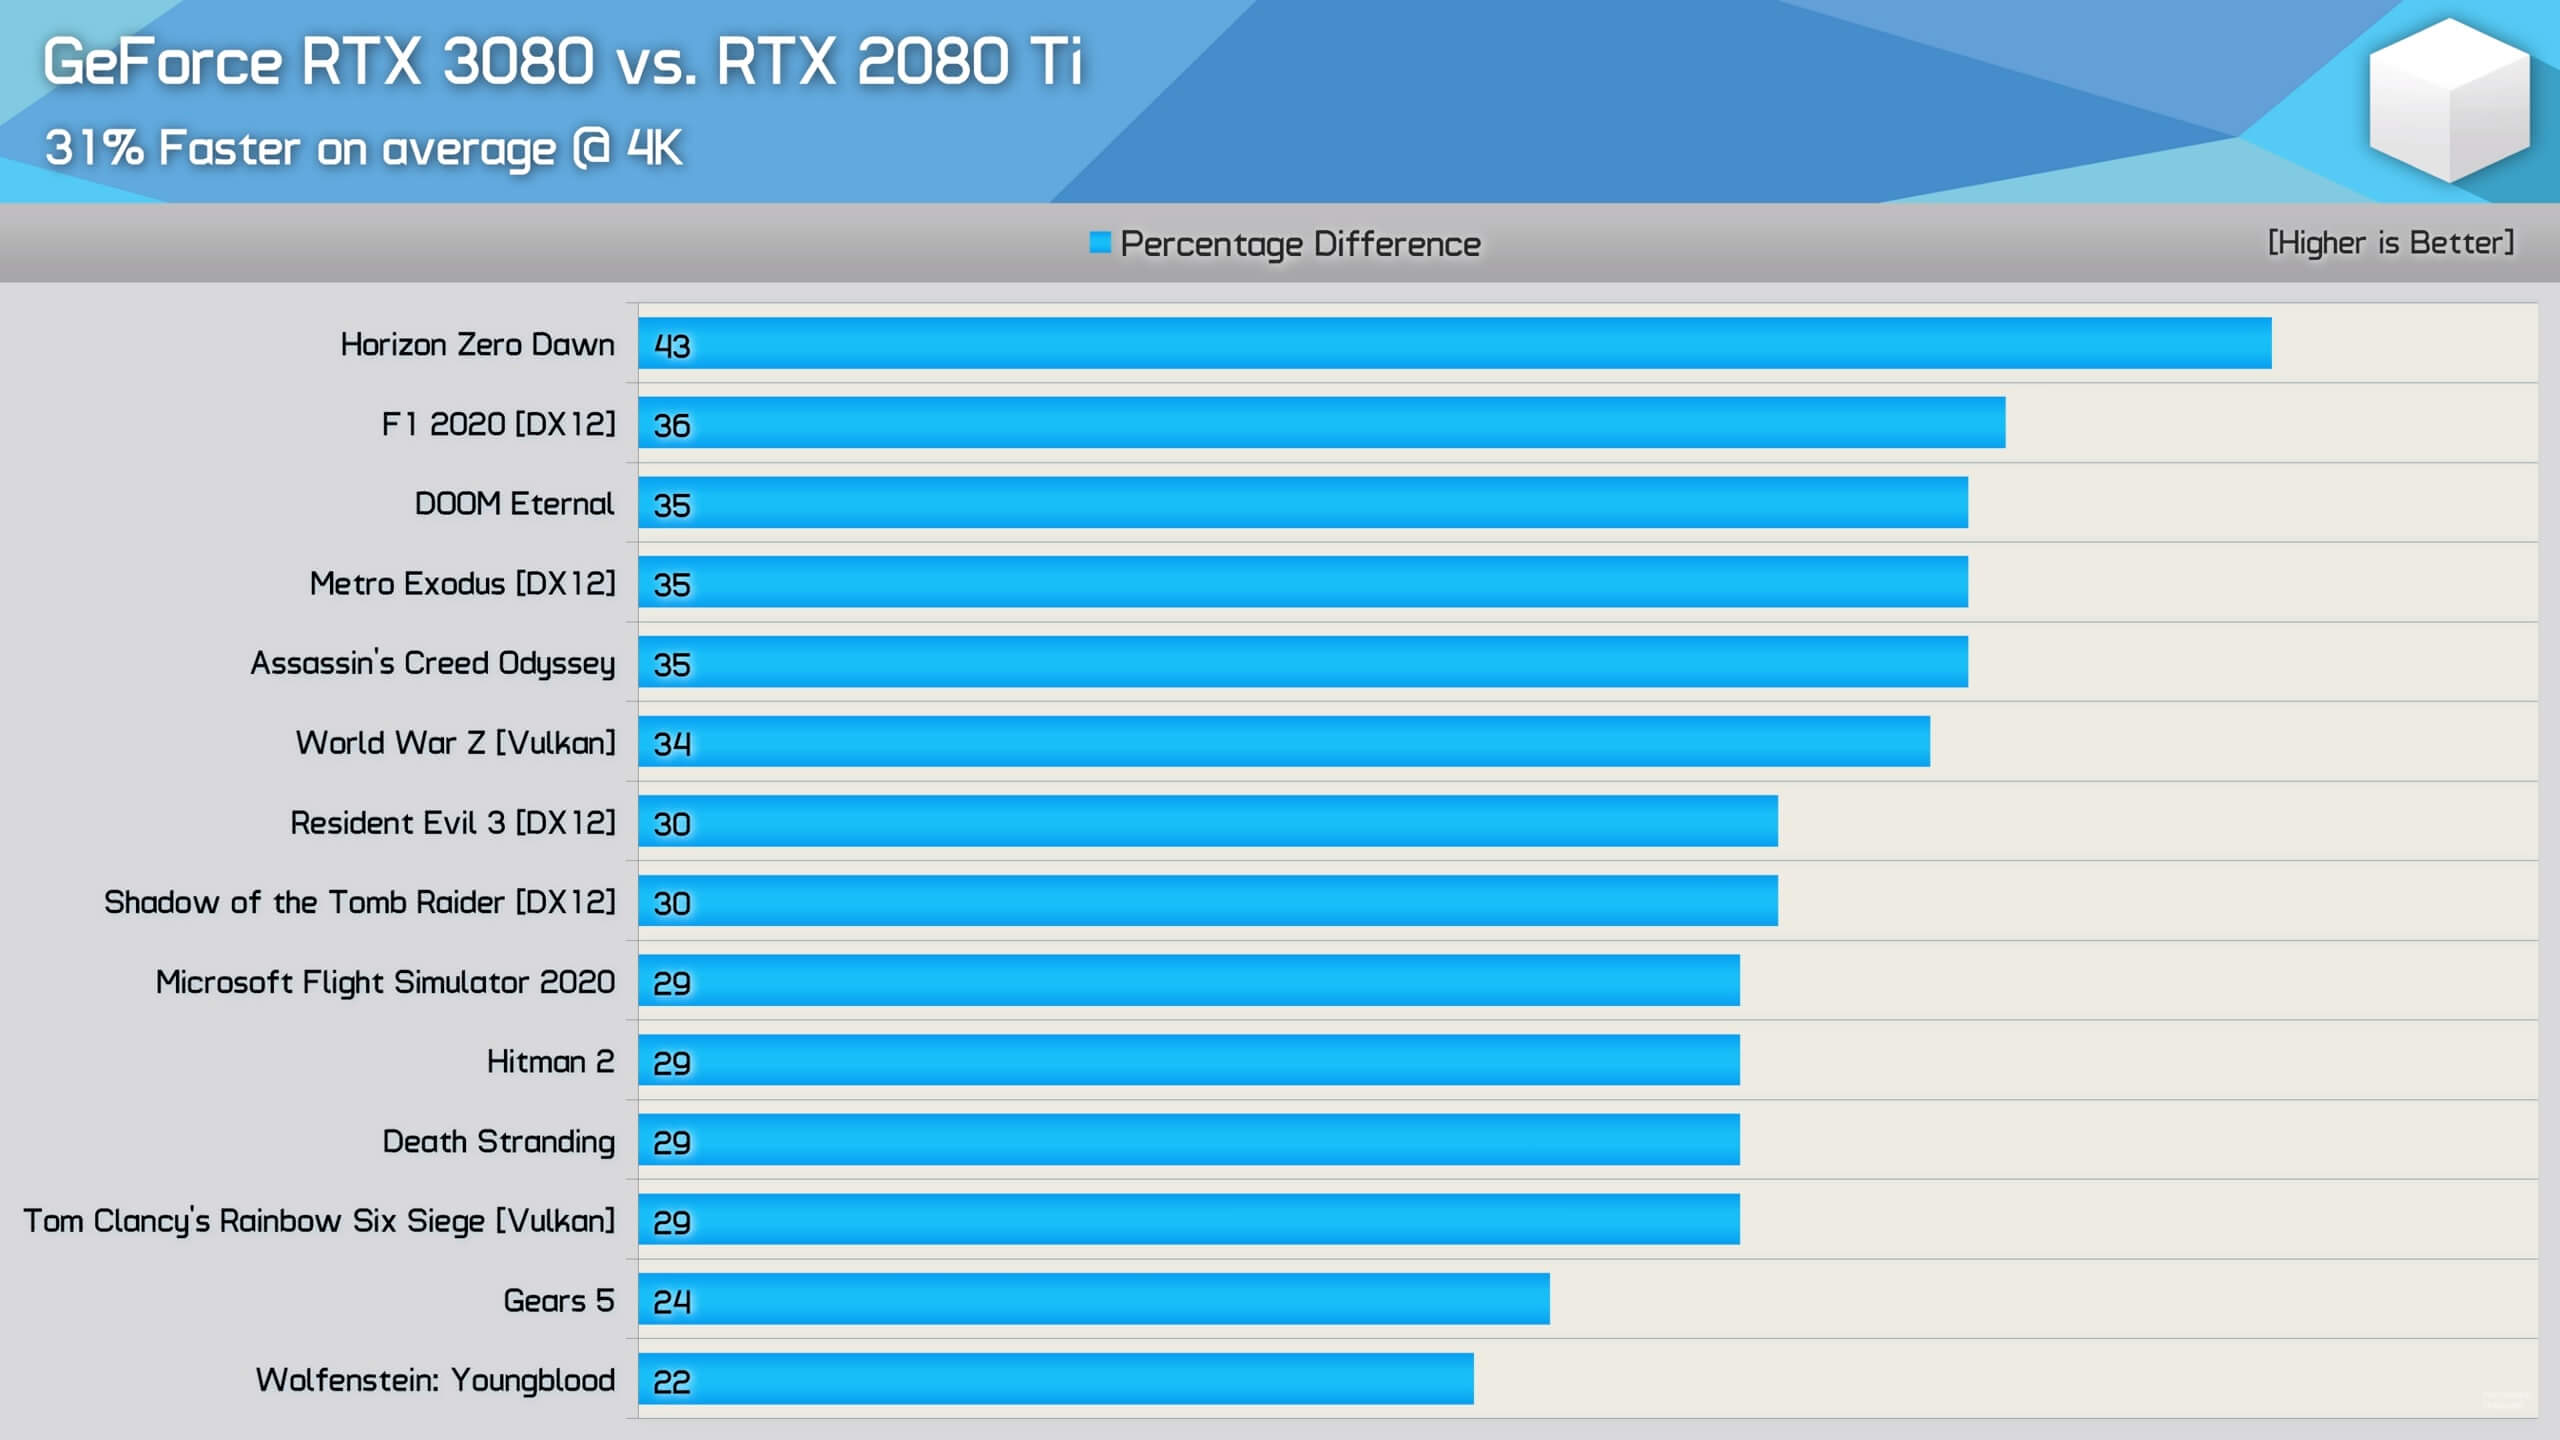 AMD releases GPU Comparison Tool so you need not look up third-party  benchmarks - Neowin